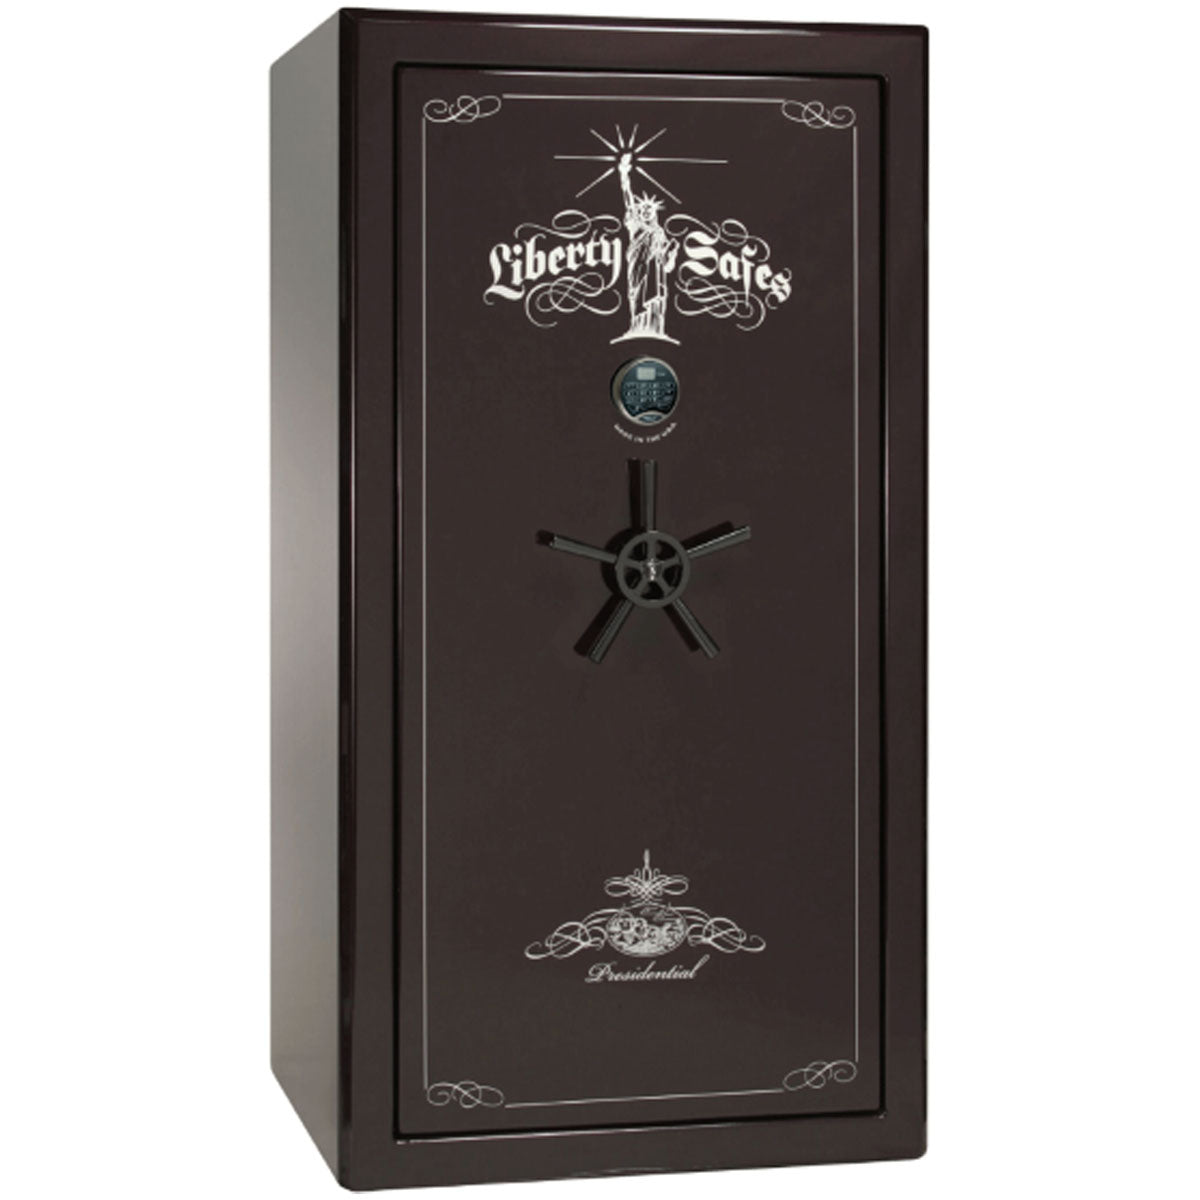 Liberty Safe Presidential 40 in Black Cherry Gloss with Black Chrome Electronic Lock, closed door.